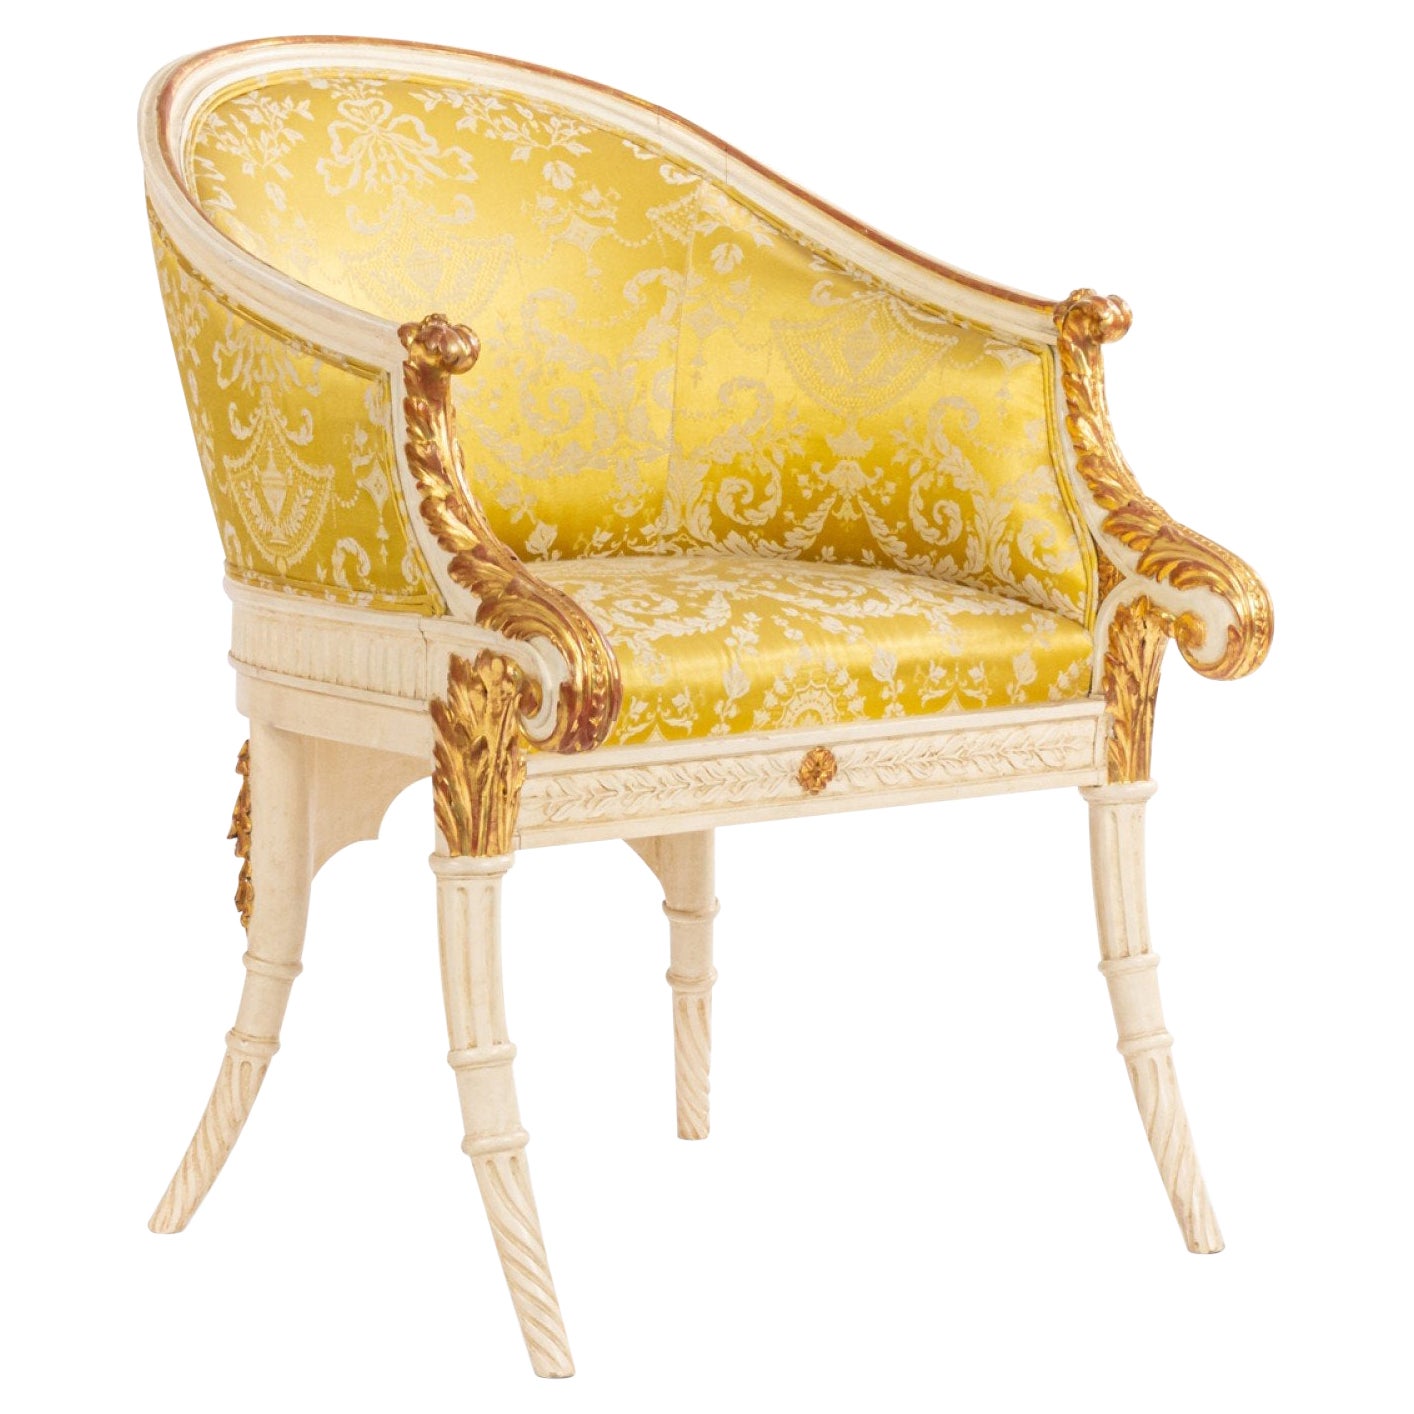 Italian Neo-Classic Style 19th Century White and Gold Arm Chair